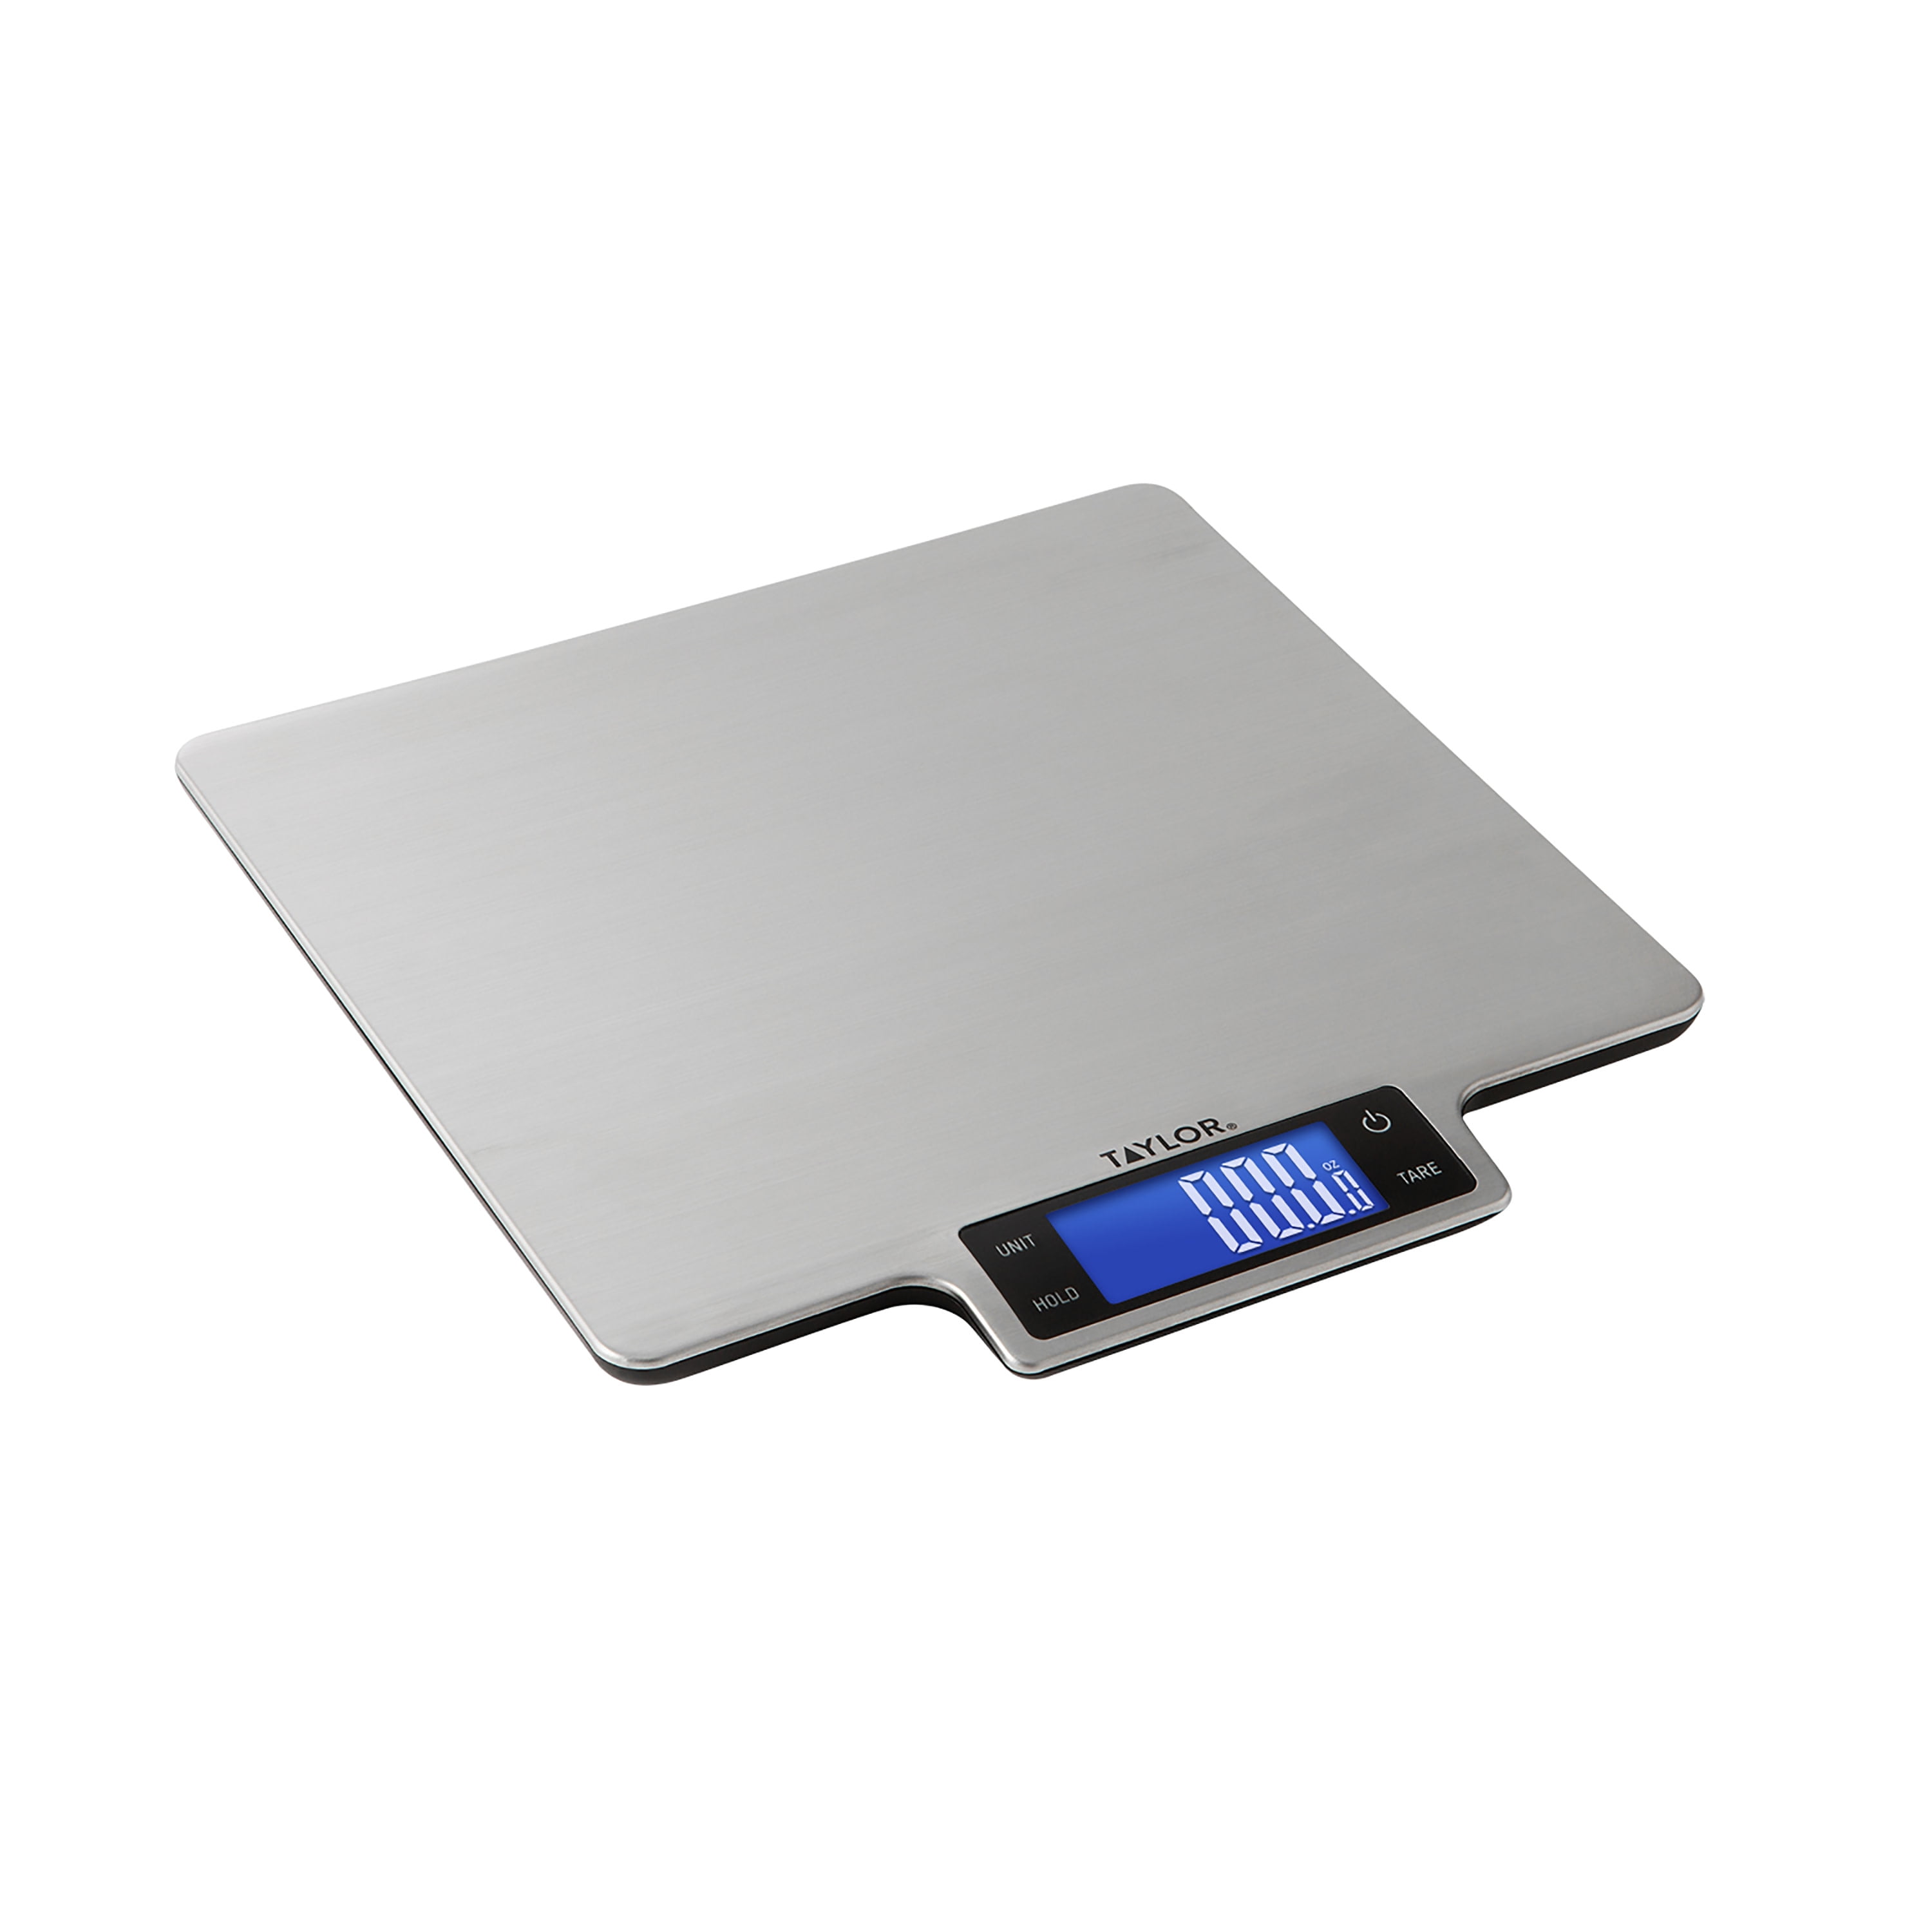 22lb Kitchen Scale with Stainless Steel Storage Container & Lid – Taylor USA